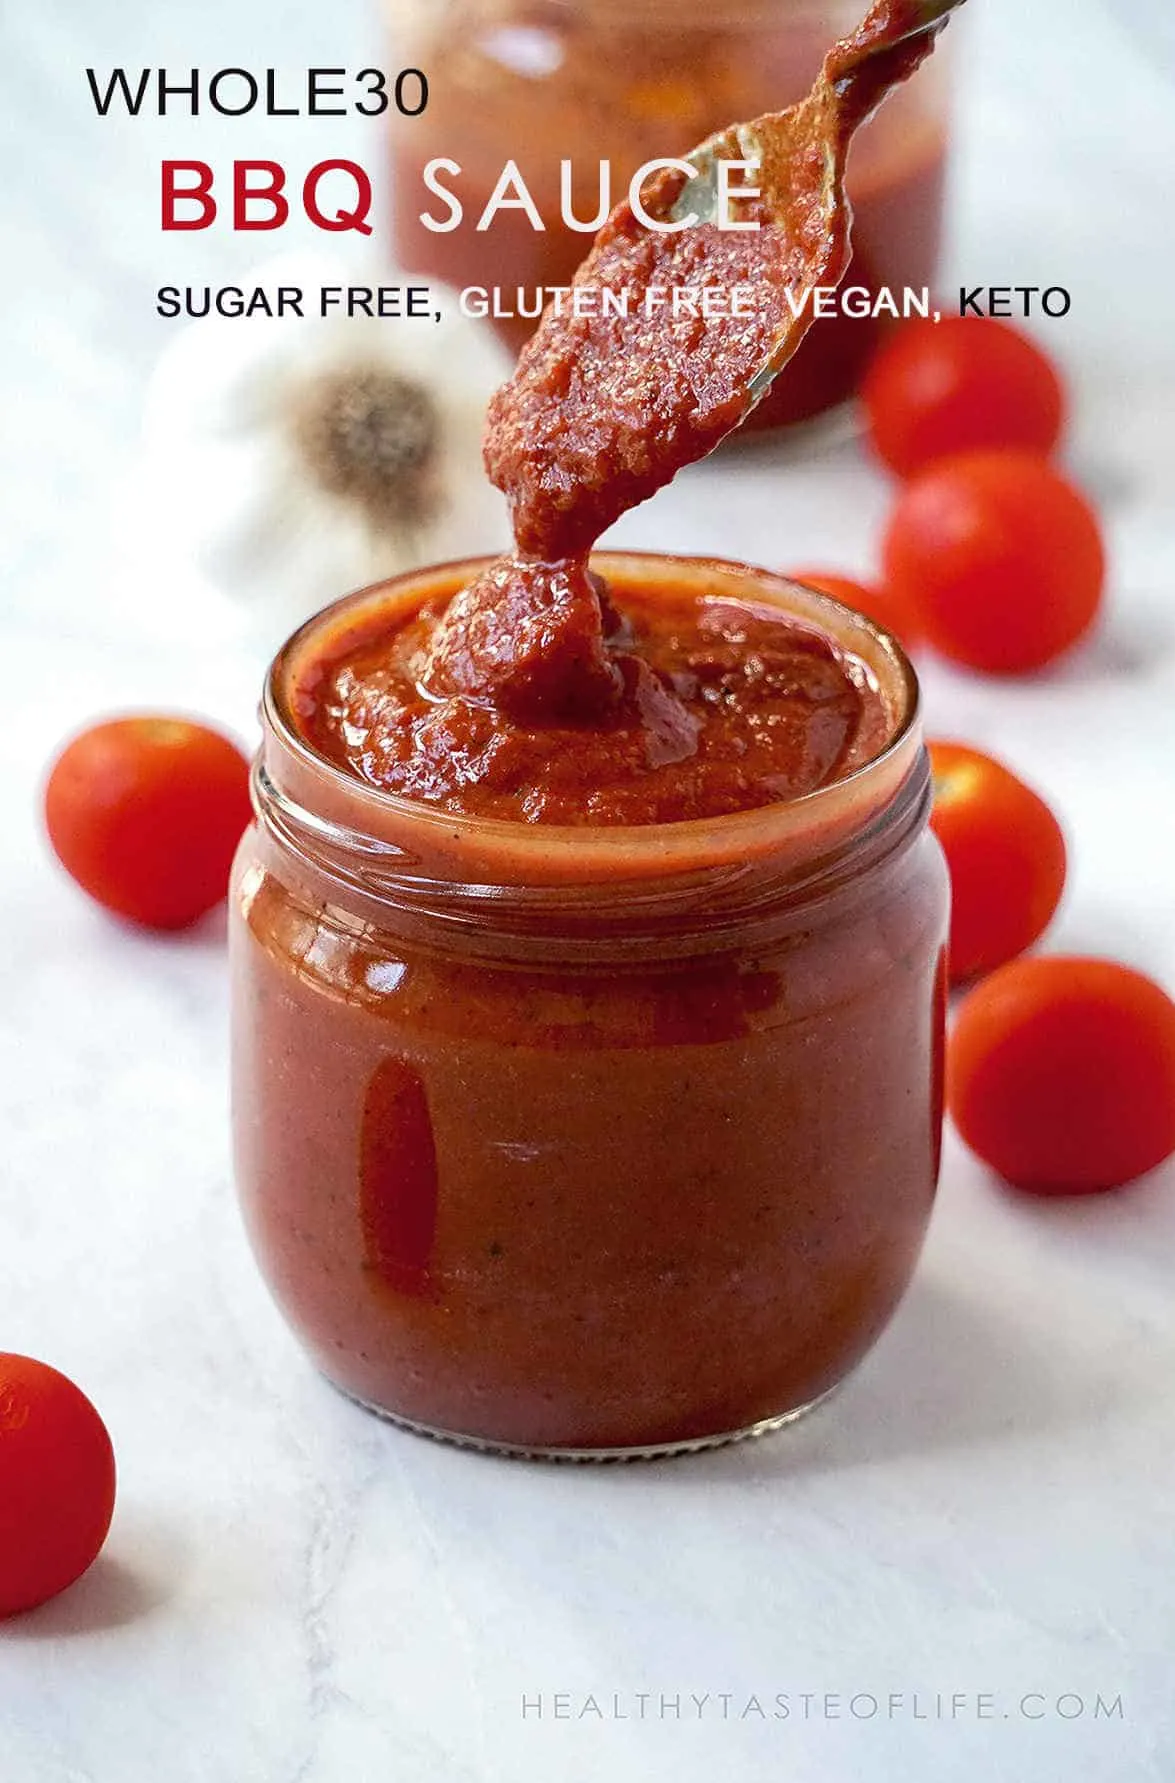 A sugar free BBQ sauce recipe made from scratch with healthy ingredients. No ketchup base here, dairy free, gluten free and low carb. This healthy sugar free BBQ sauce is also paleo, keto, clean eating, vegan and whole30 approved. Only 25 calories and 2.7 carbs per serving!